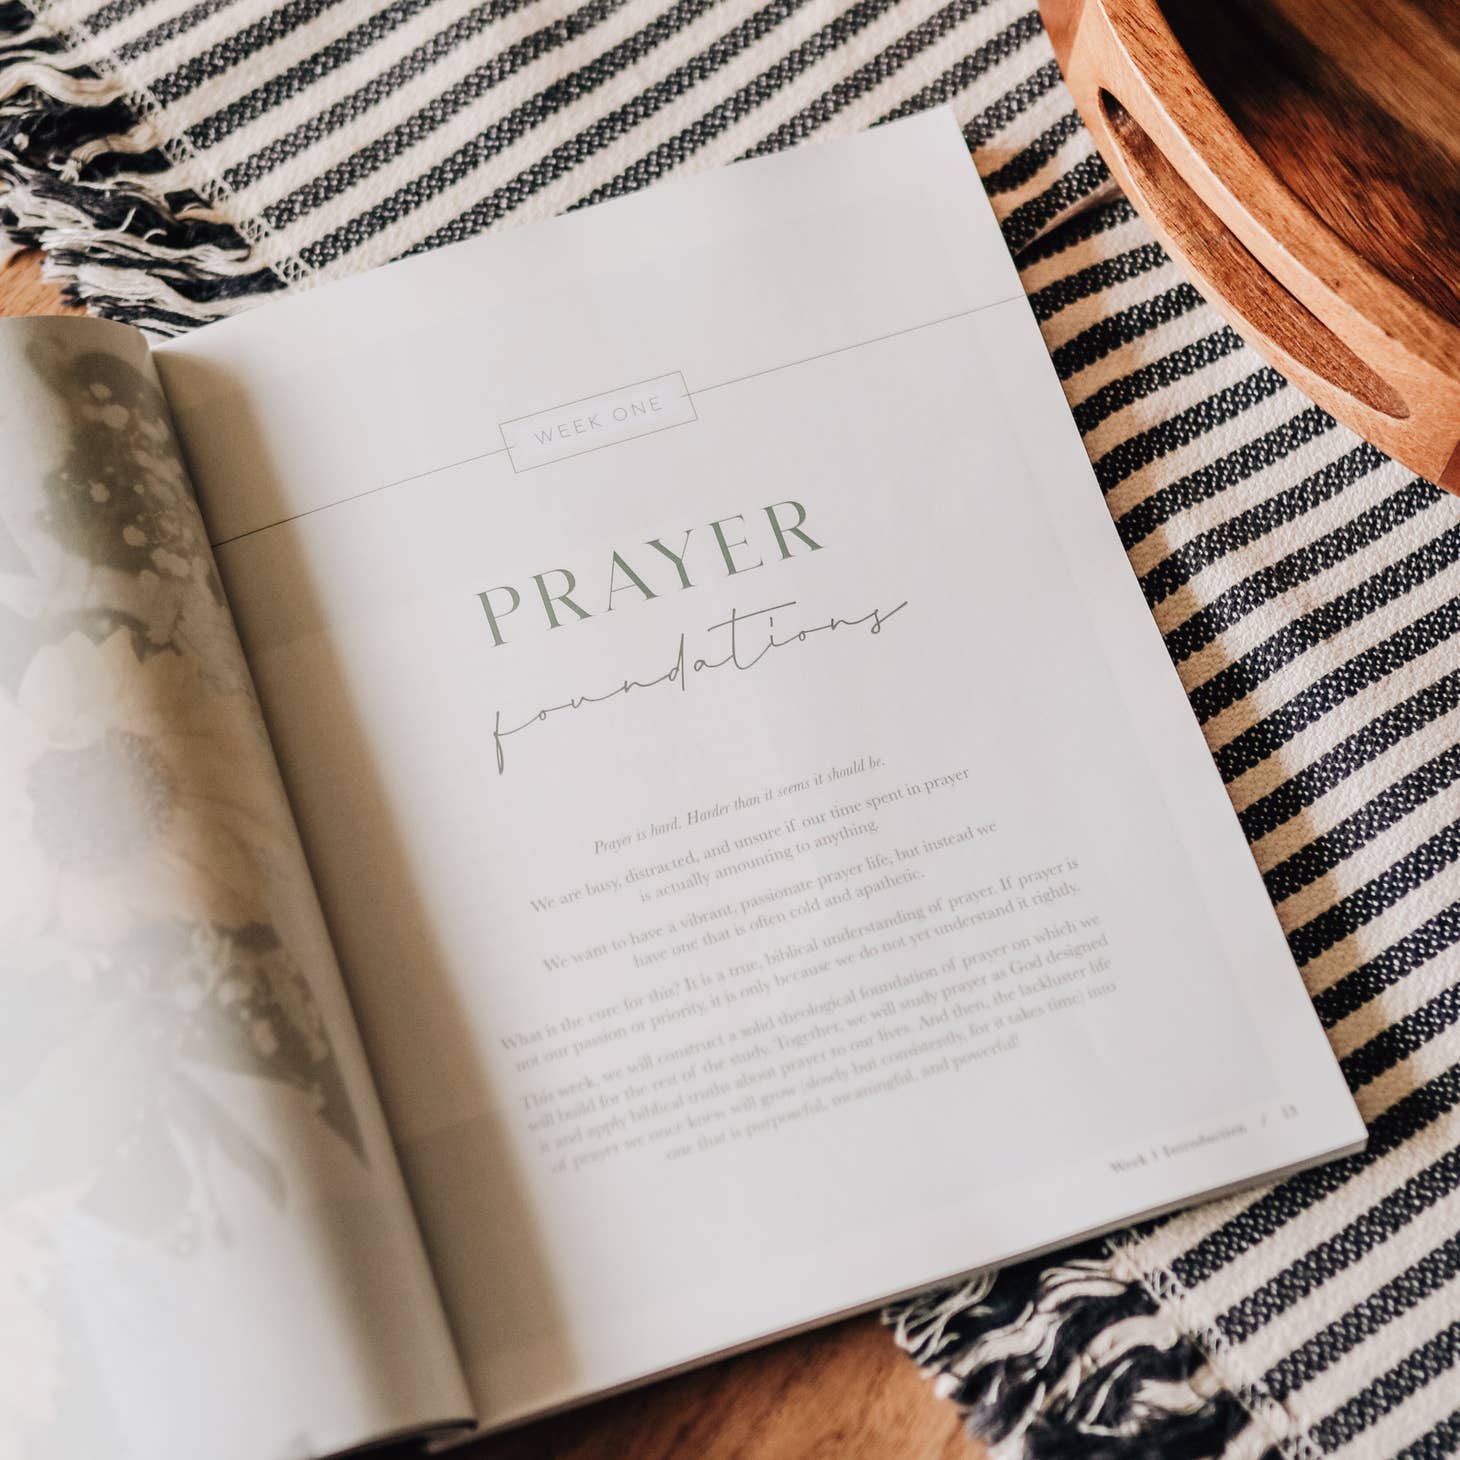 Pray | Cultivating A Passionate Practice of Prayer